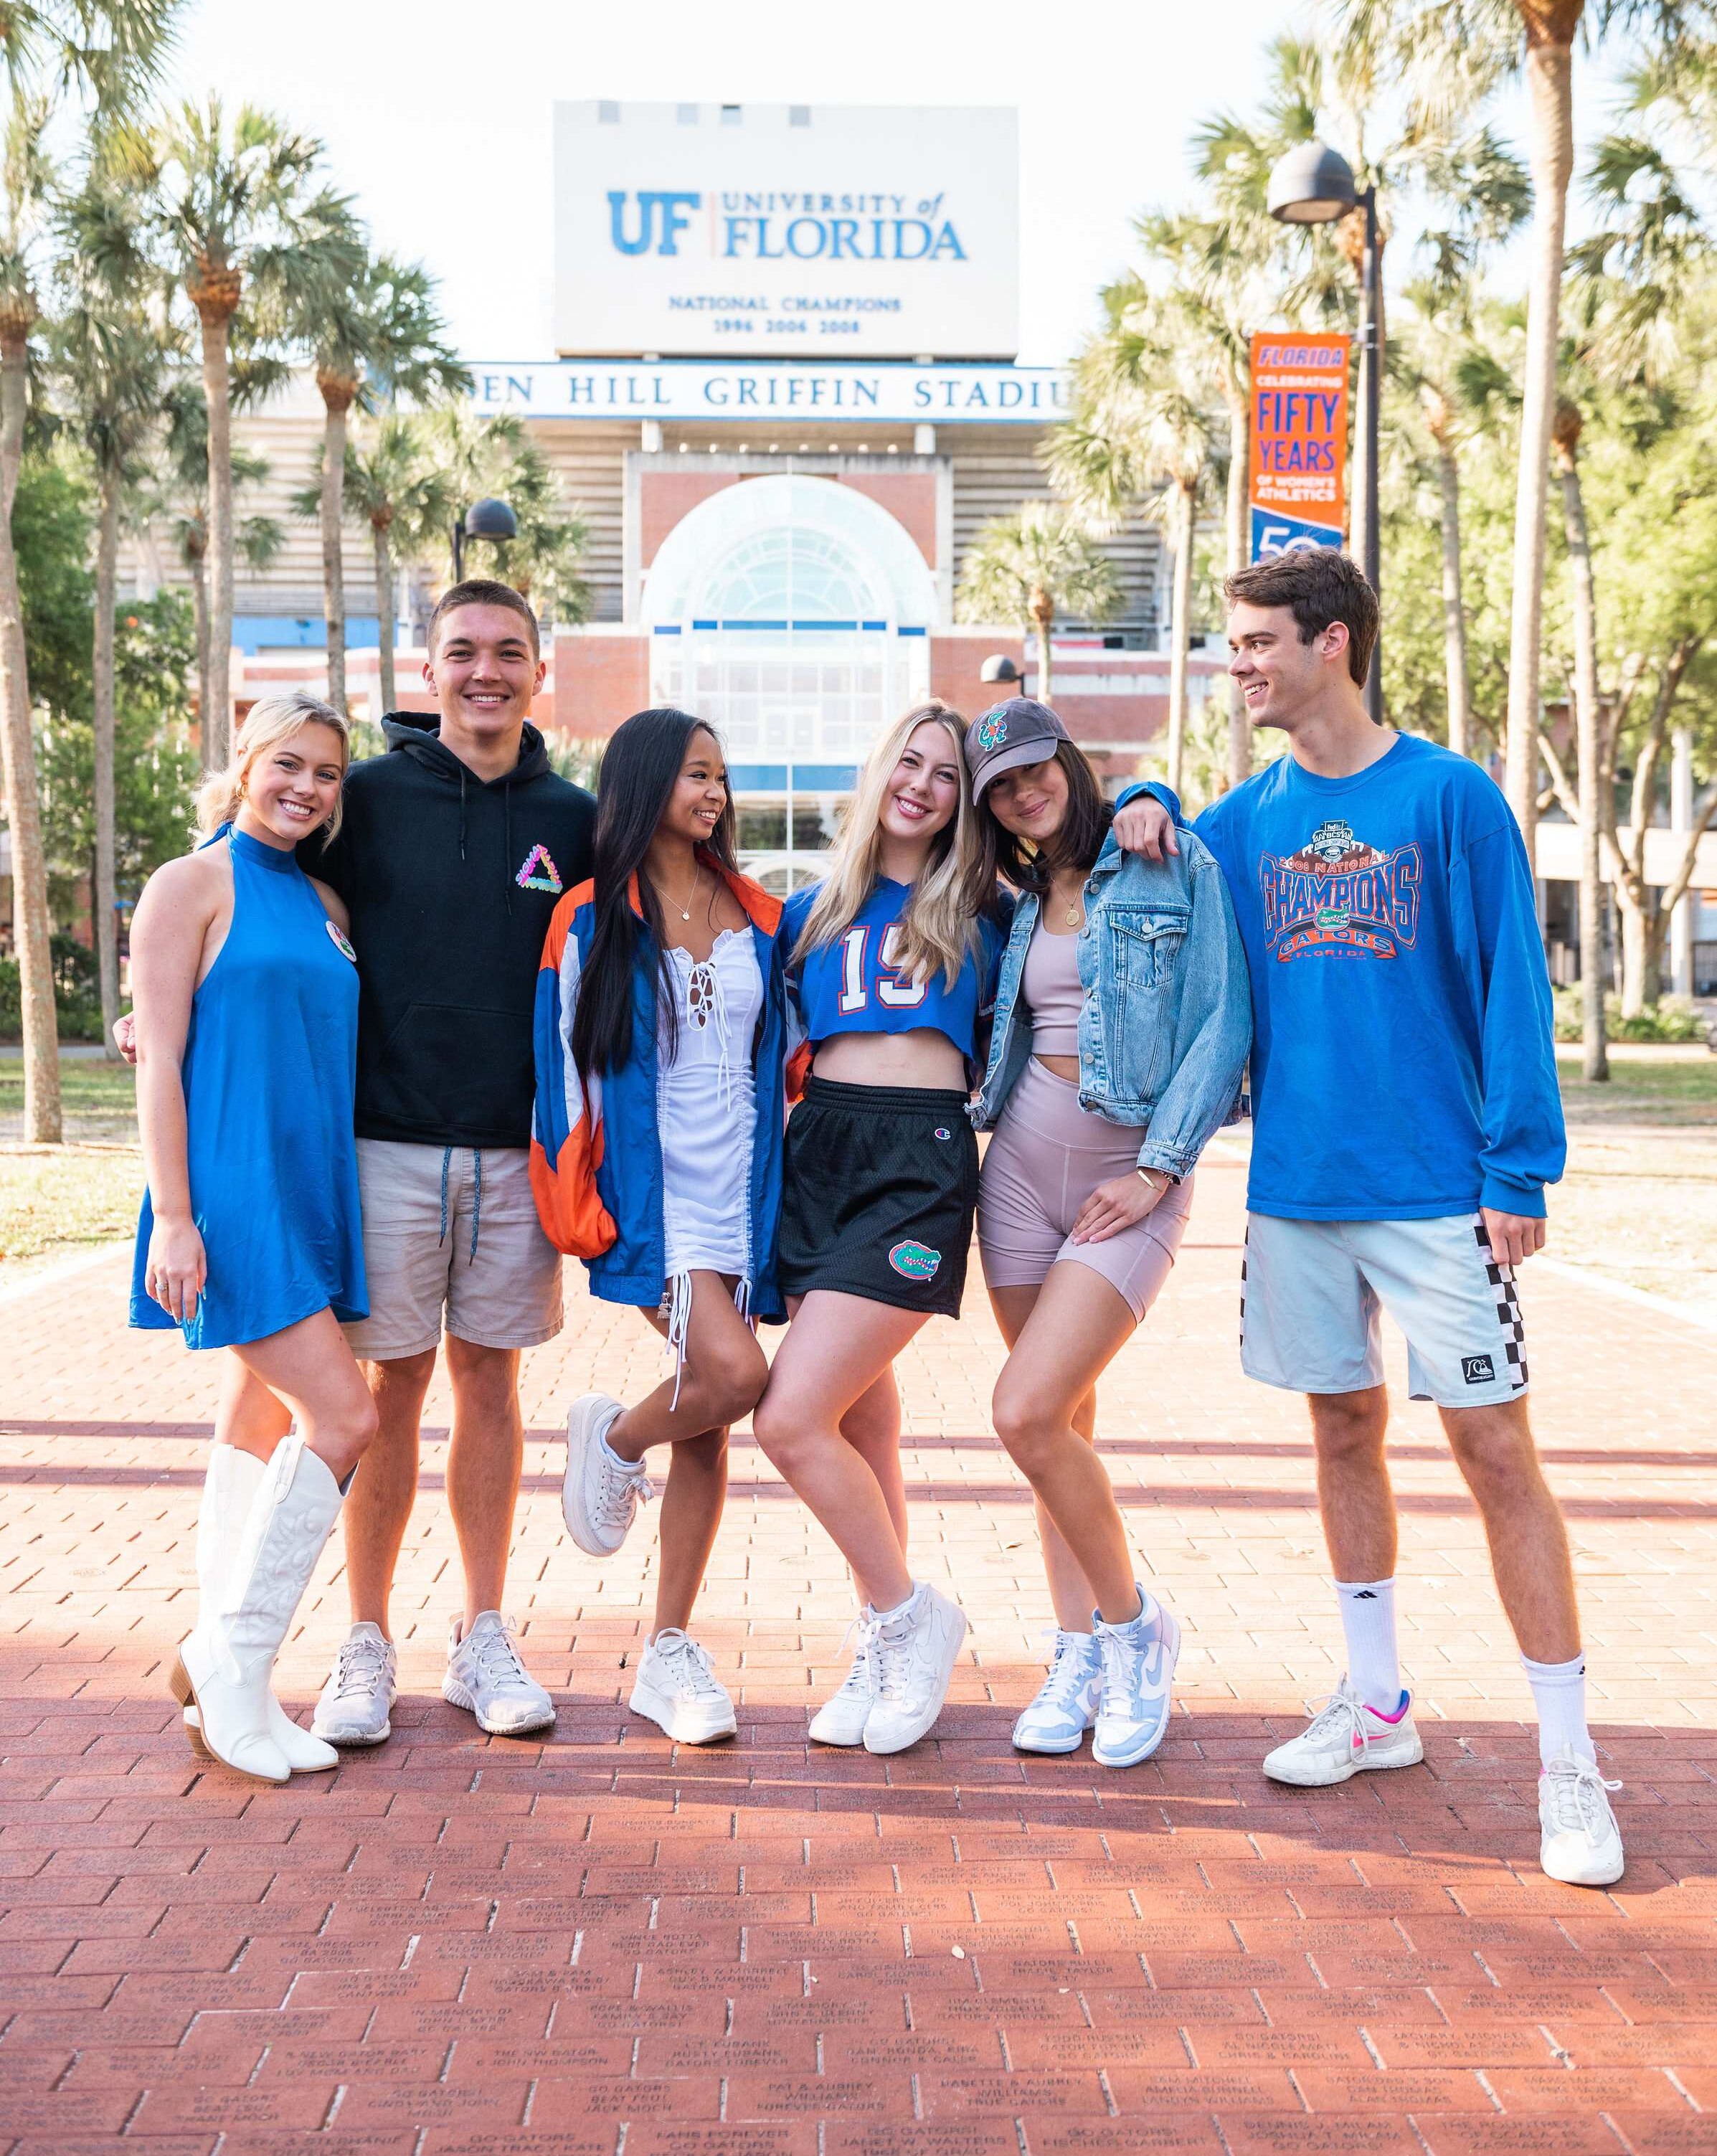 group shot in front of the UF stadium